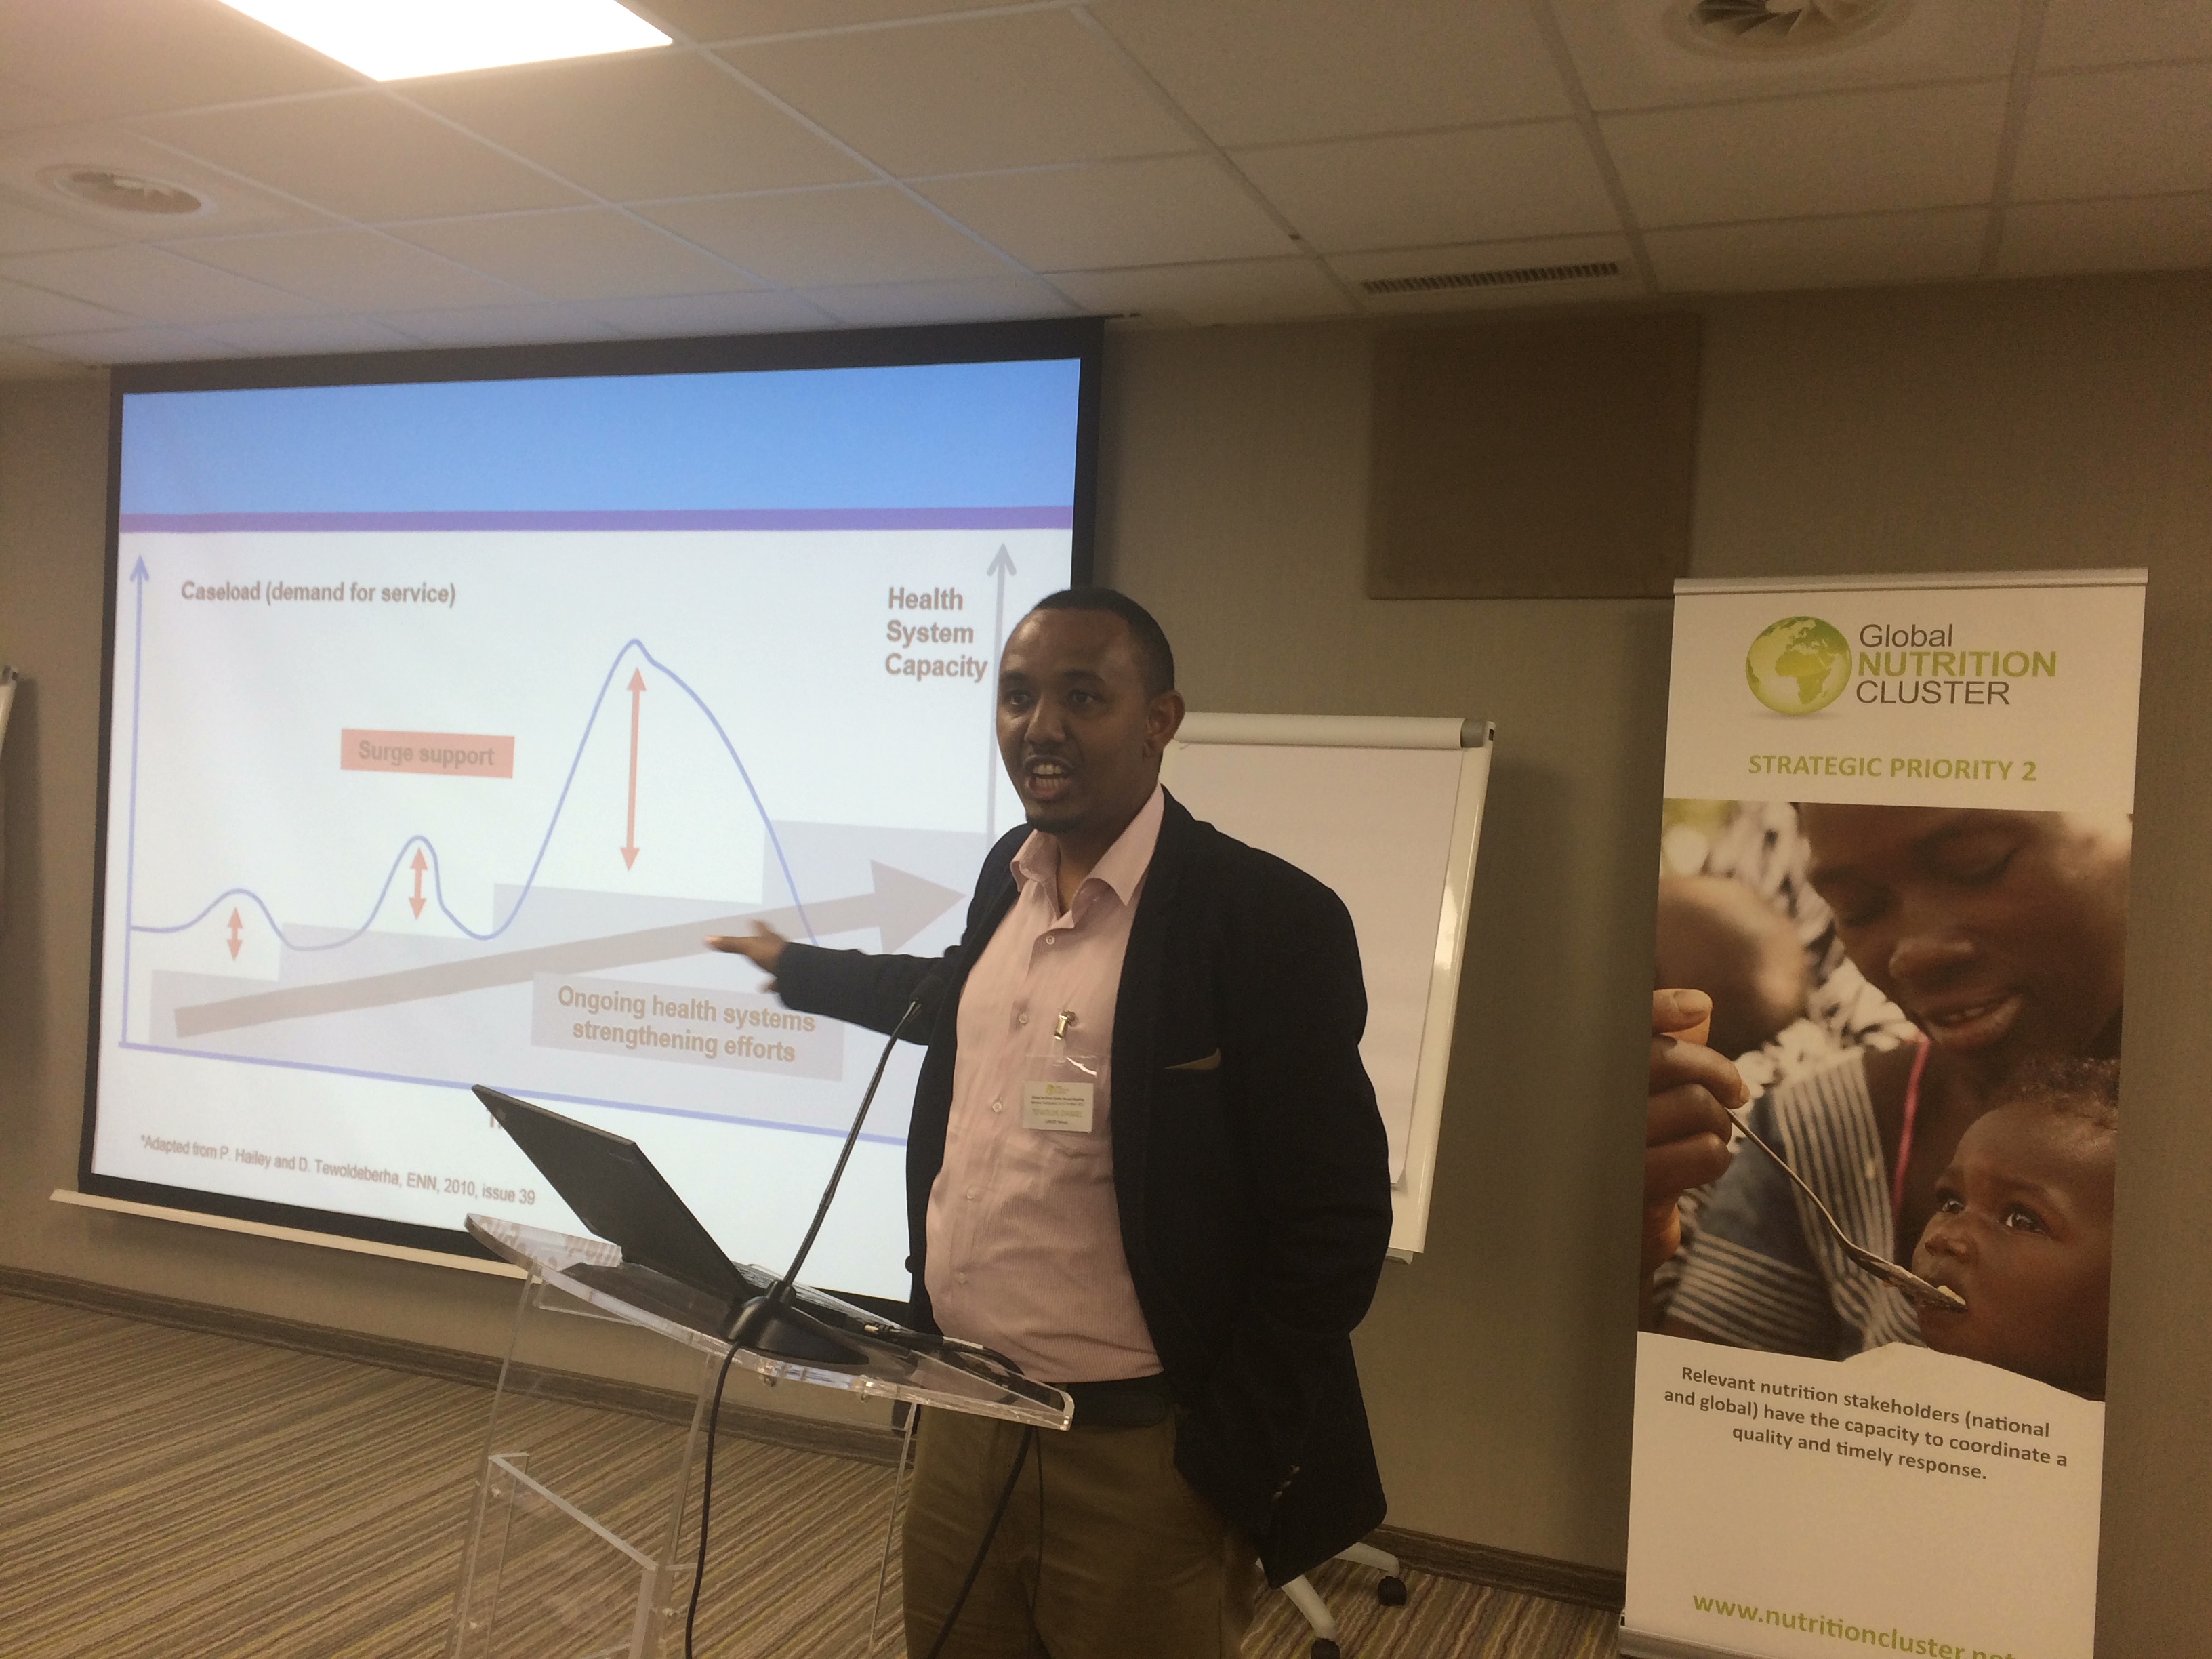 Image shows man presenting at The Global Nutrition Cluster Annual Meeting in 2017.